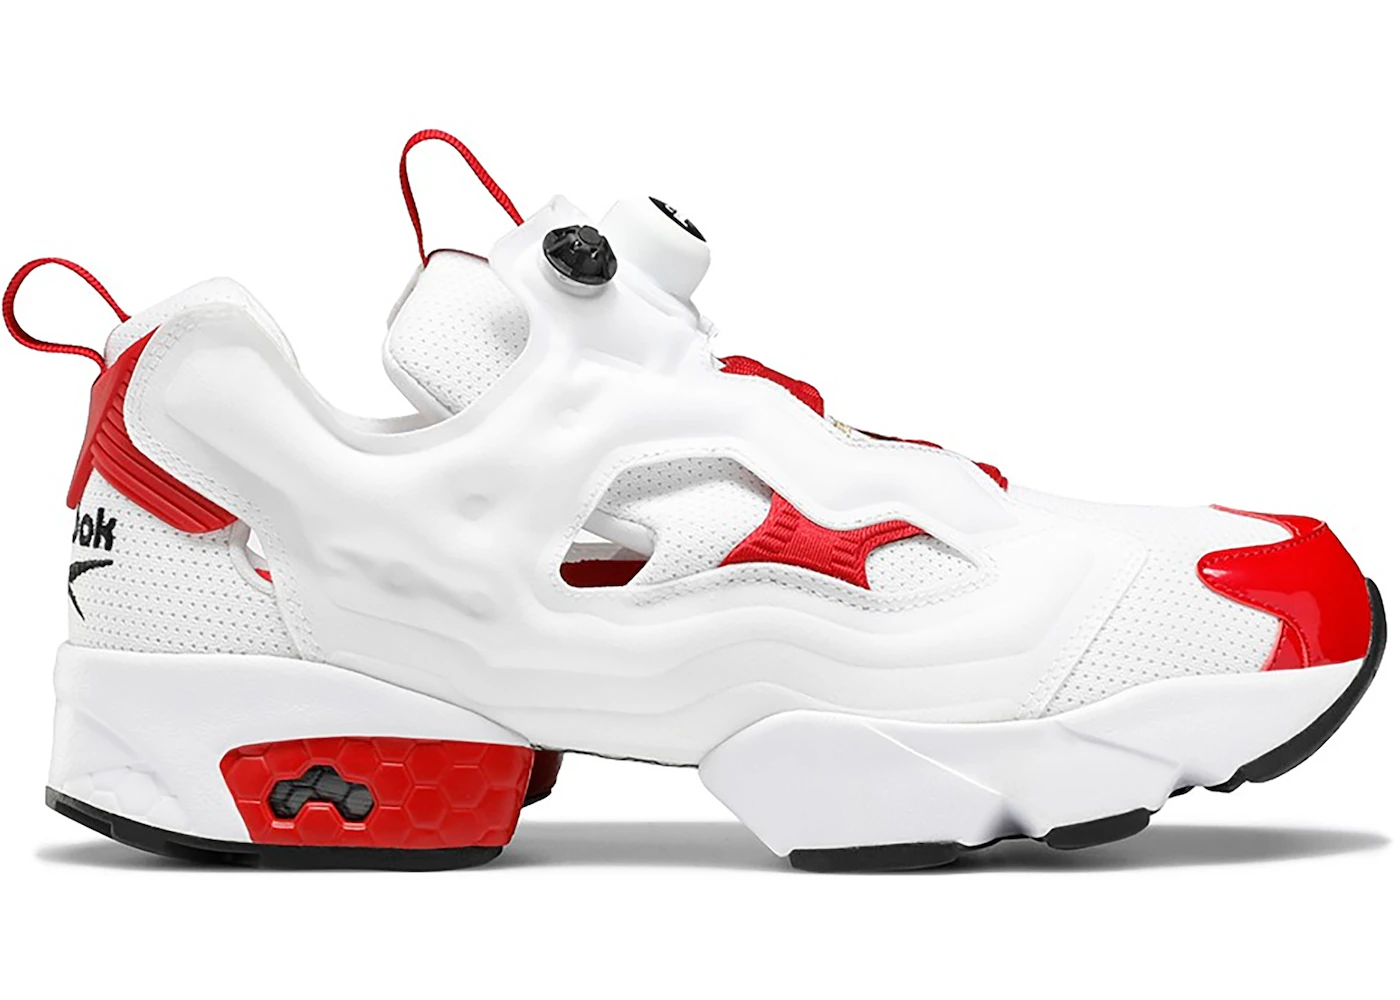 Reebok Instapump Fury White Excellent Red